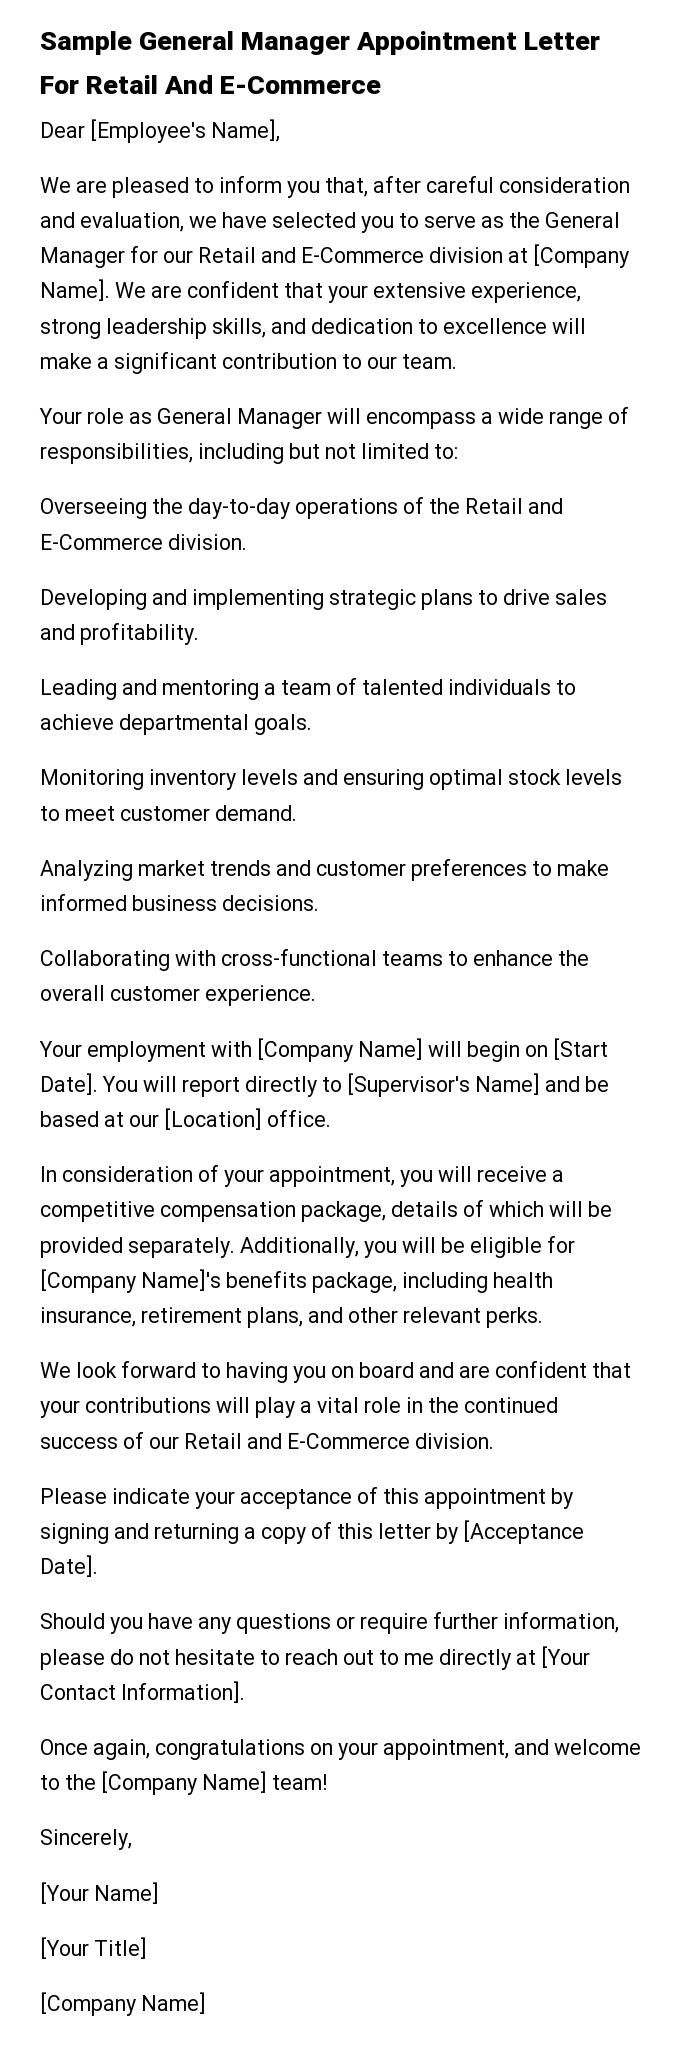 Sample General Manager Appointment Letter For Retail And E-Commerce